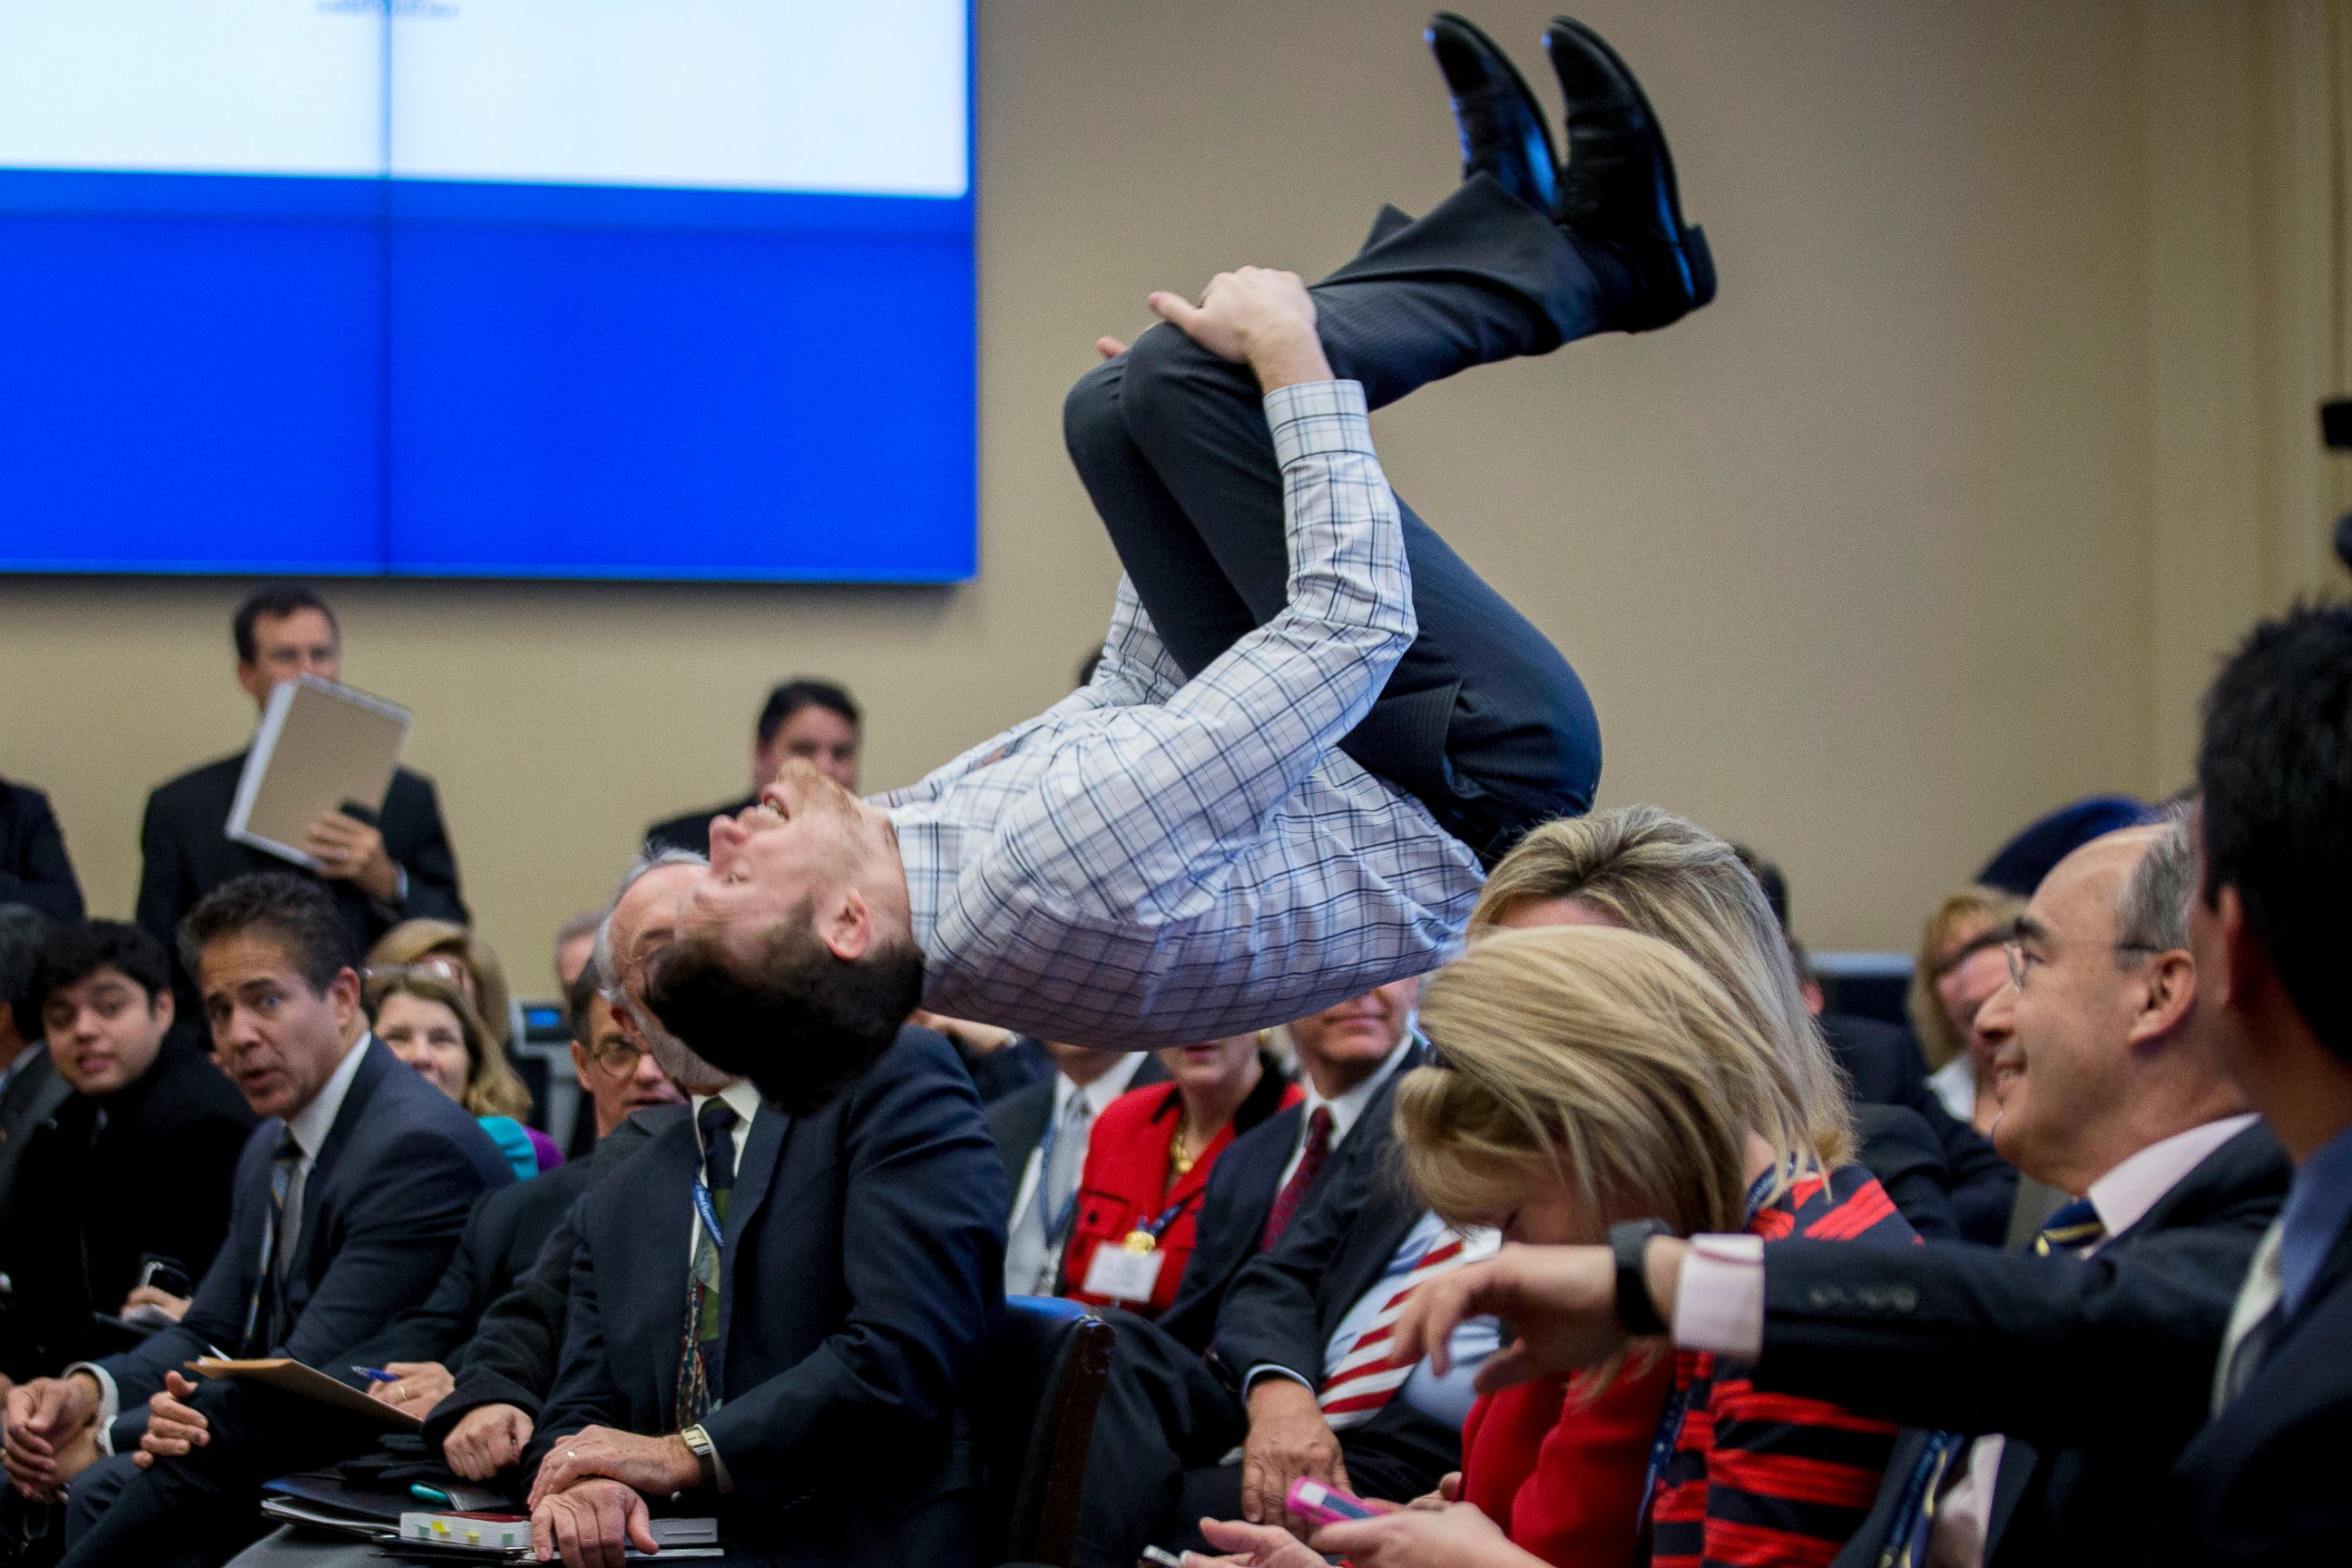 PHOTO: Representative-elect Gwen Graham supporter Paul Woodward performs a back flip during a member-elect room lottery draw on Capitol Hill in Washington, D.C. on Nov. 19, 2014.